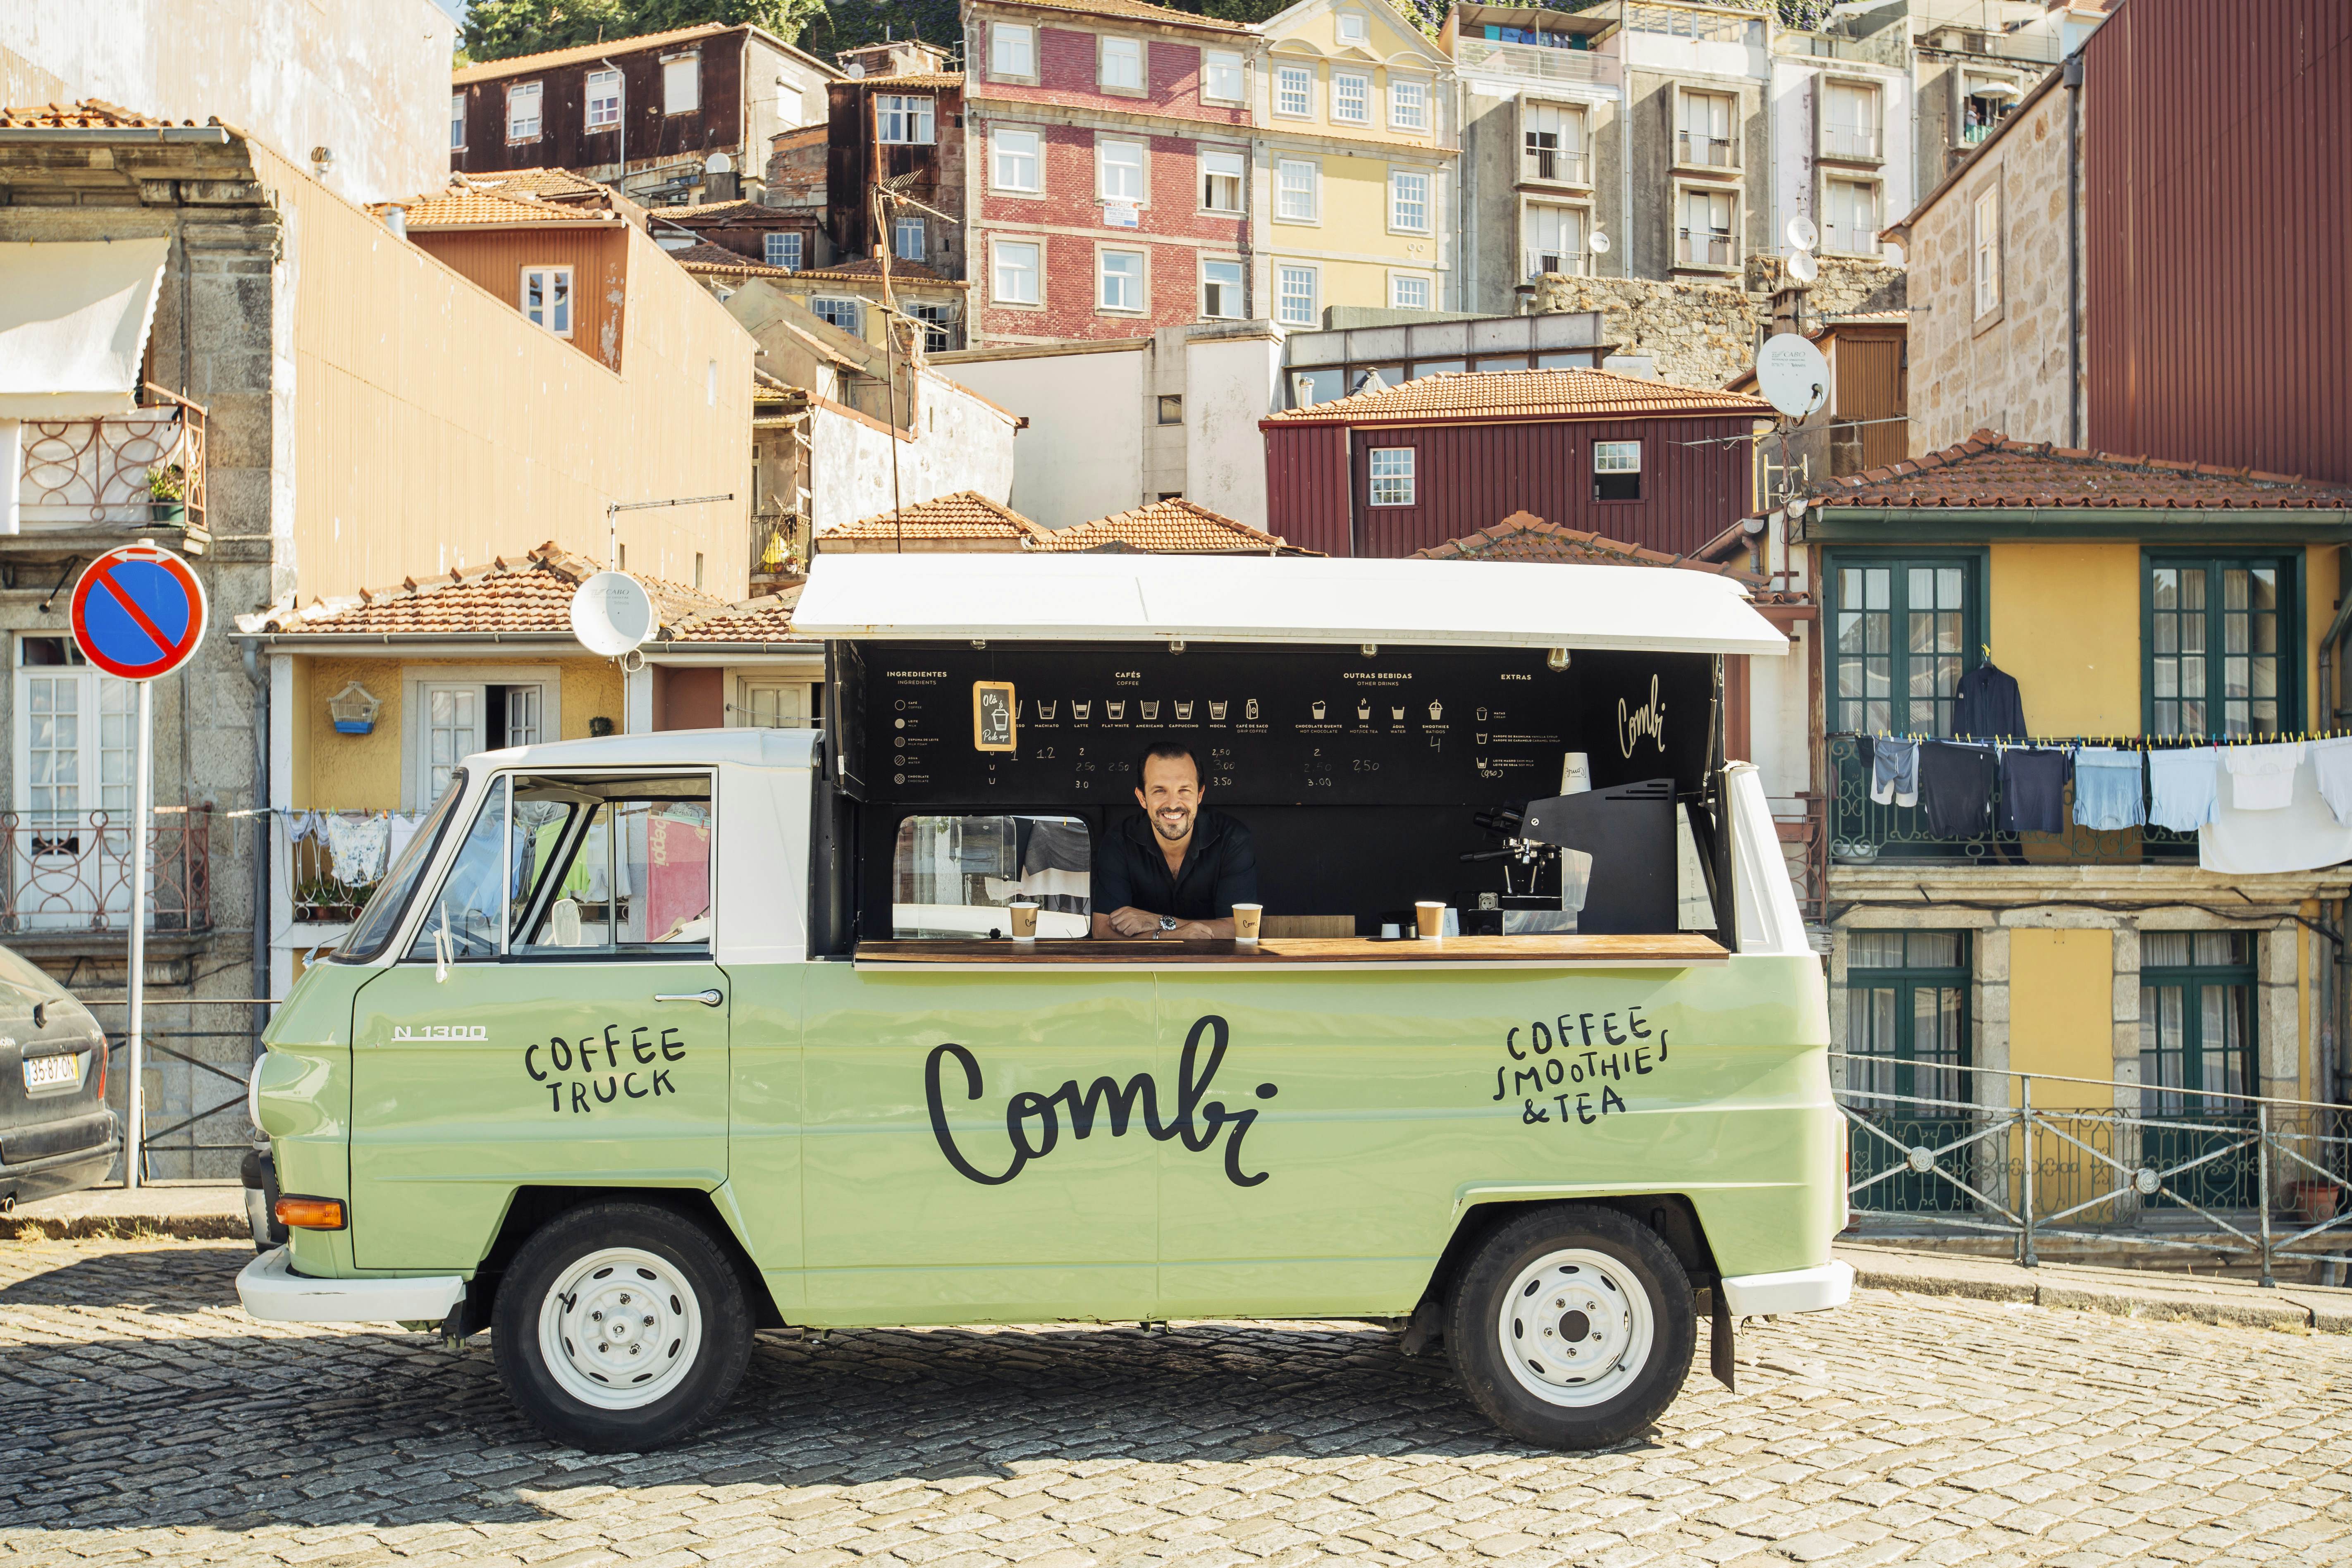 How to spend an active weekend in Porto, Portugal's riverside city